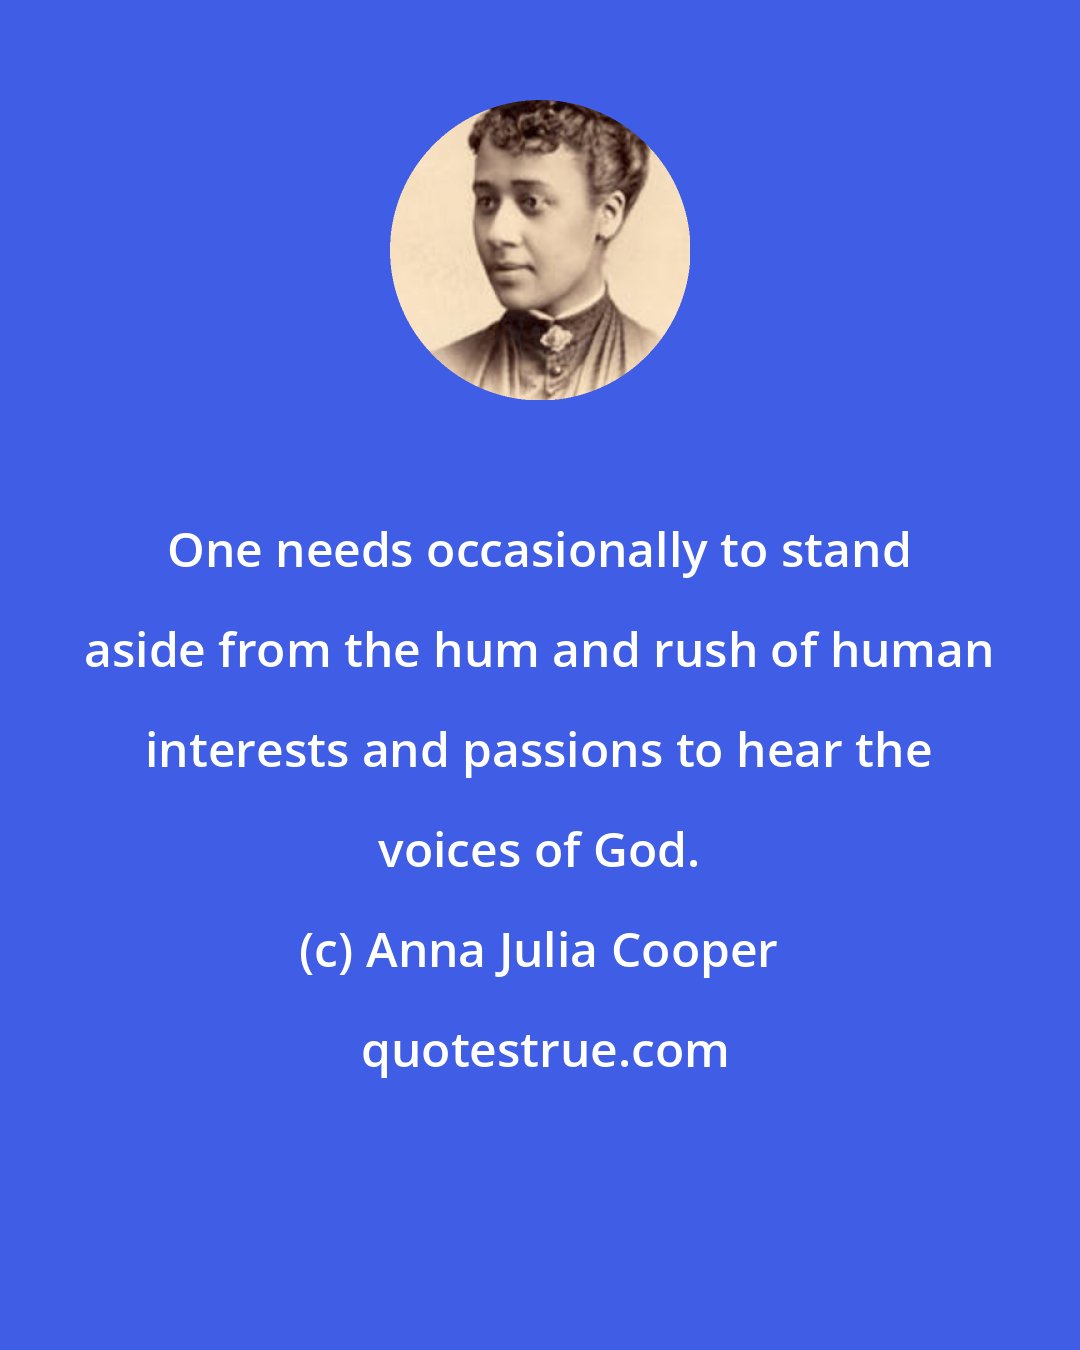 Anna Julia Cooper: One needs occasionally to stand aside from the hum and rush of human interests and passions to hear the voices of God.